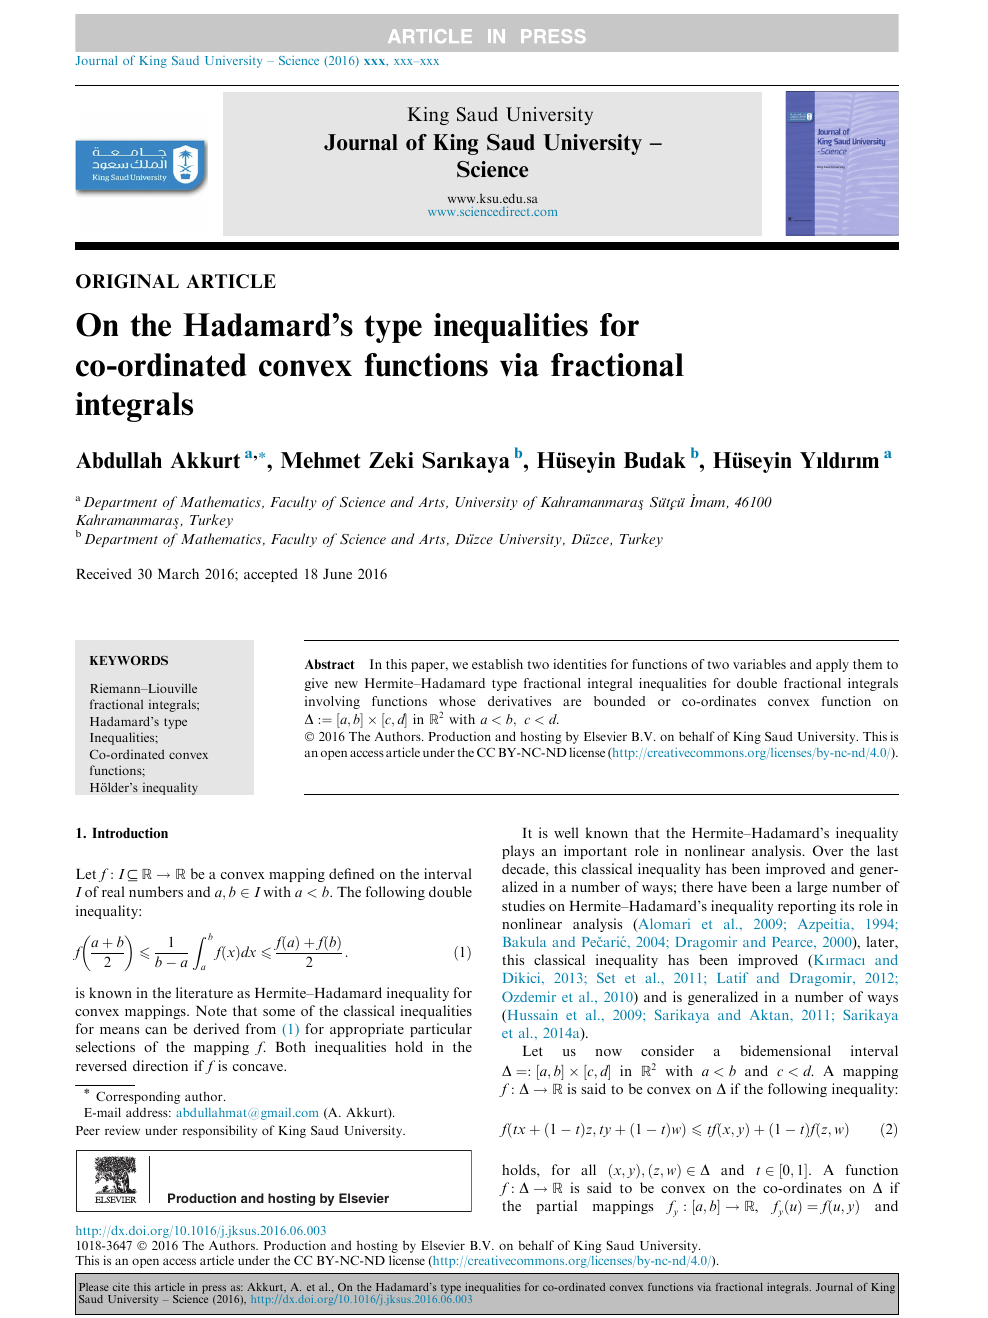 On The Hadamard S Type Inequalities For Co Ordinated Convex Functions Via Fractional Integrals Topic Of Research Paper In Physical Sciences Download Scholarly Article Pdf And Read For Free On Cyberleninka Open Science